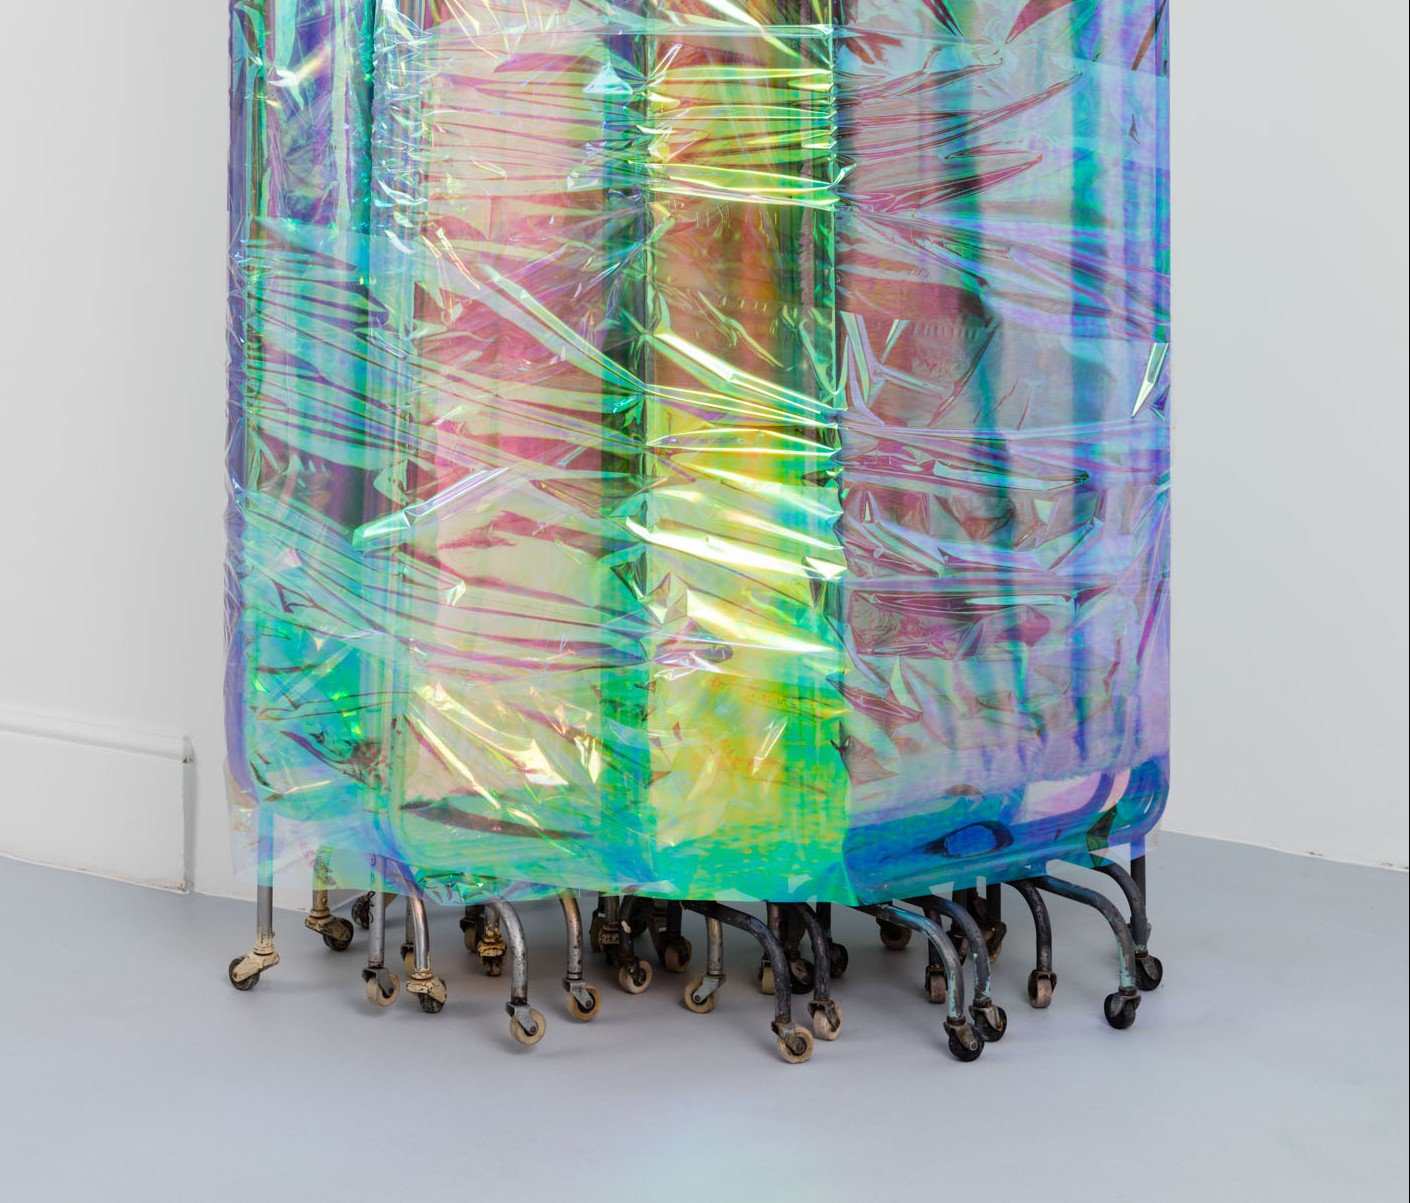 Ian Law, There was a body, I was there, was a body, detail, medical privacy screens with soft toy fur fabric and curtain netting, gift wrapped, 171 x 108 cm (67 3/8 x 42 1/2 in), 2015